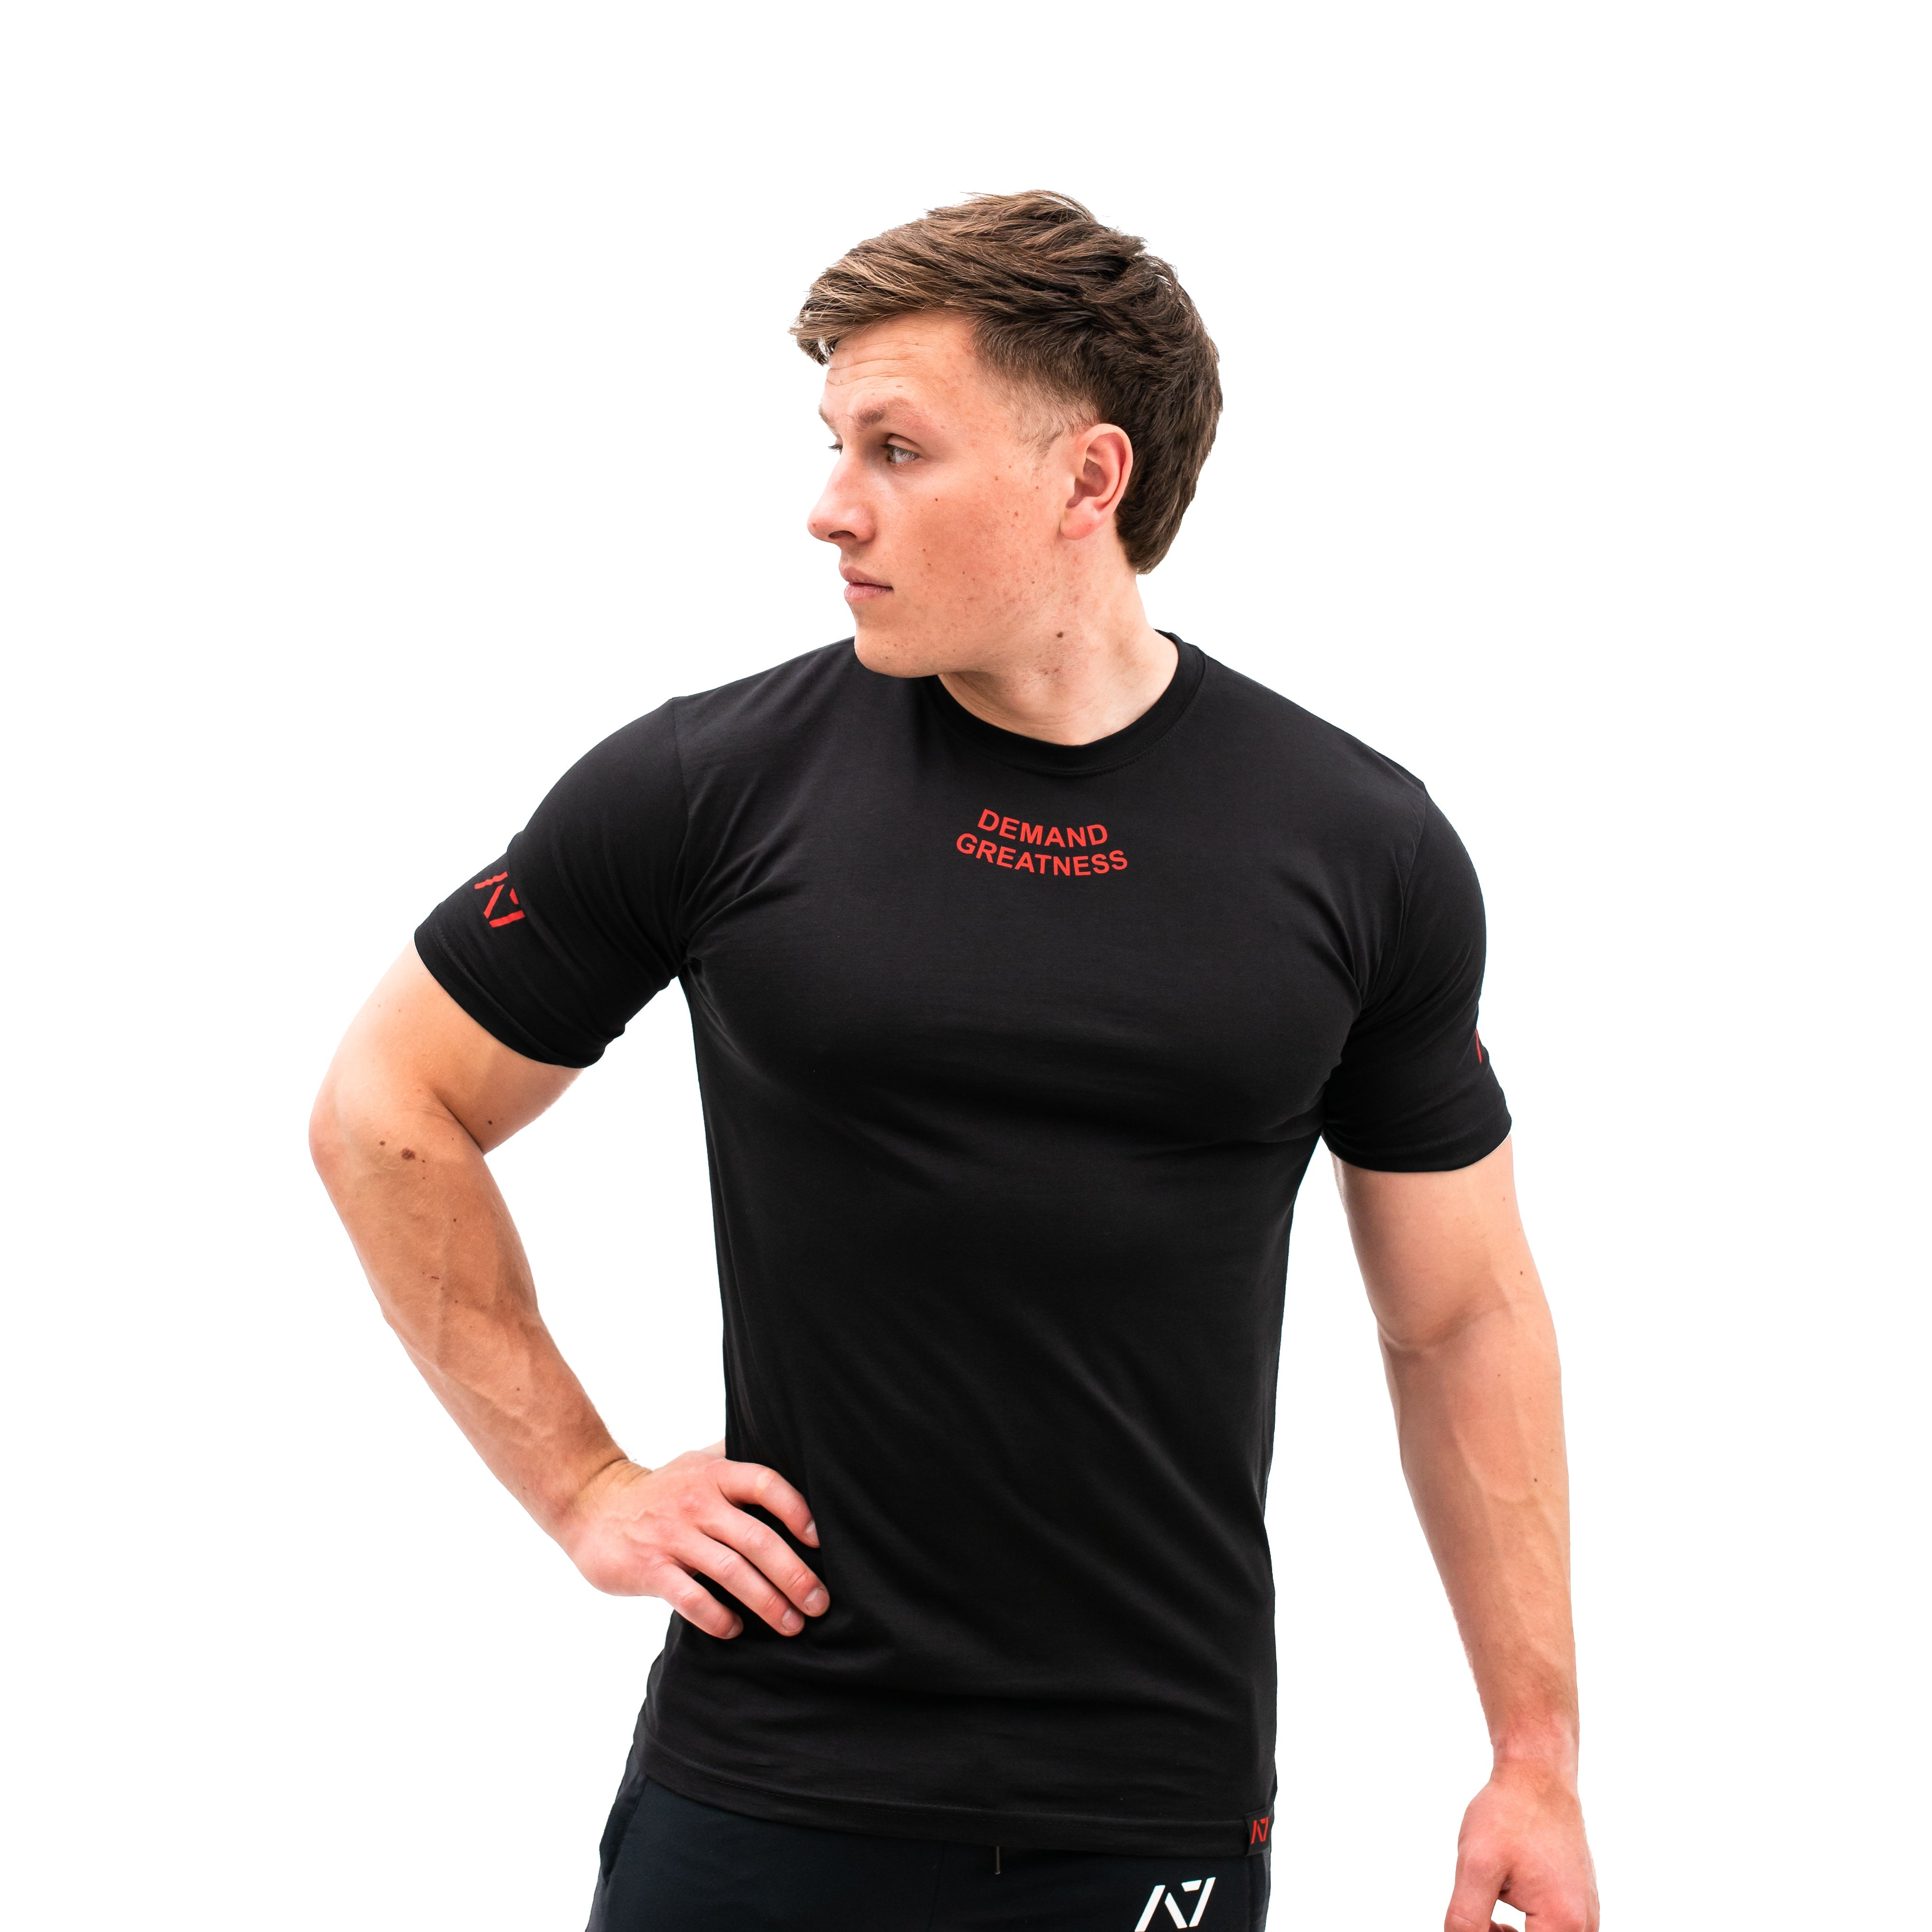 The inferno meet shirt reminds you to Demand Greatness in every step you take, every situation you approach and every lift you attempt! This competition shirt is designed to showcase your dedication to becoming the best you on the platform and off. This meet shirt is made from 100% cotton and is IPF approved. A7 Inferno Meet shirt is a great addition to your IPF Approved Kit. Purchase IPF Approved Powerlifting kit shipping to UK from A7 UK